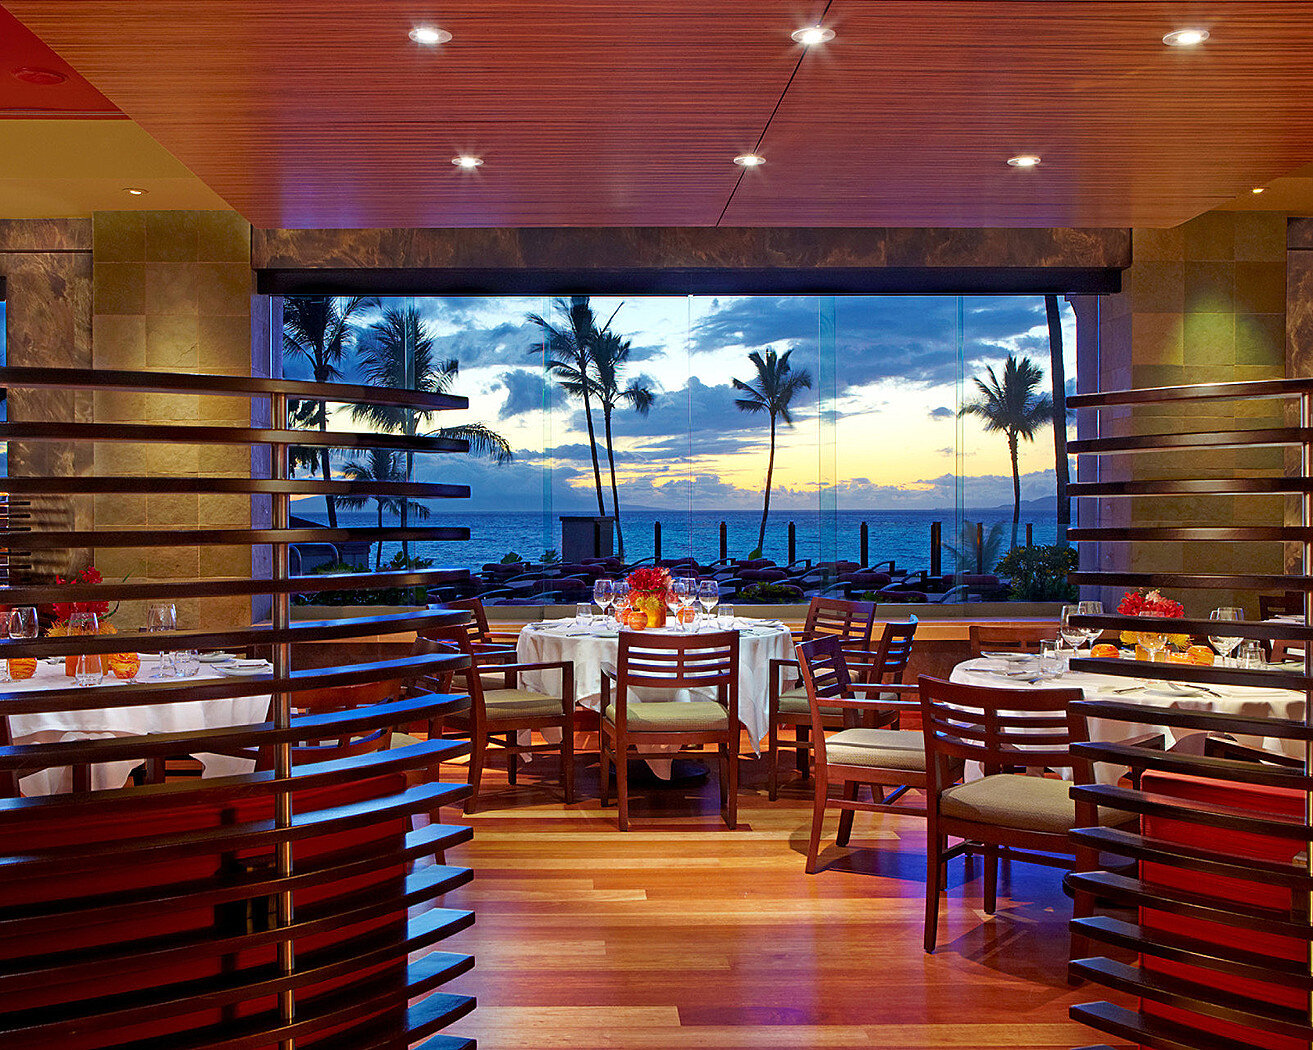   Spago Restaurant by Wolfgang Puck (photo credit: Four Seasons)  